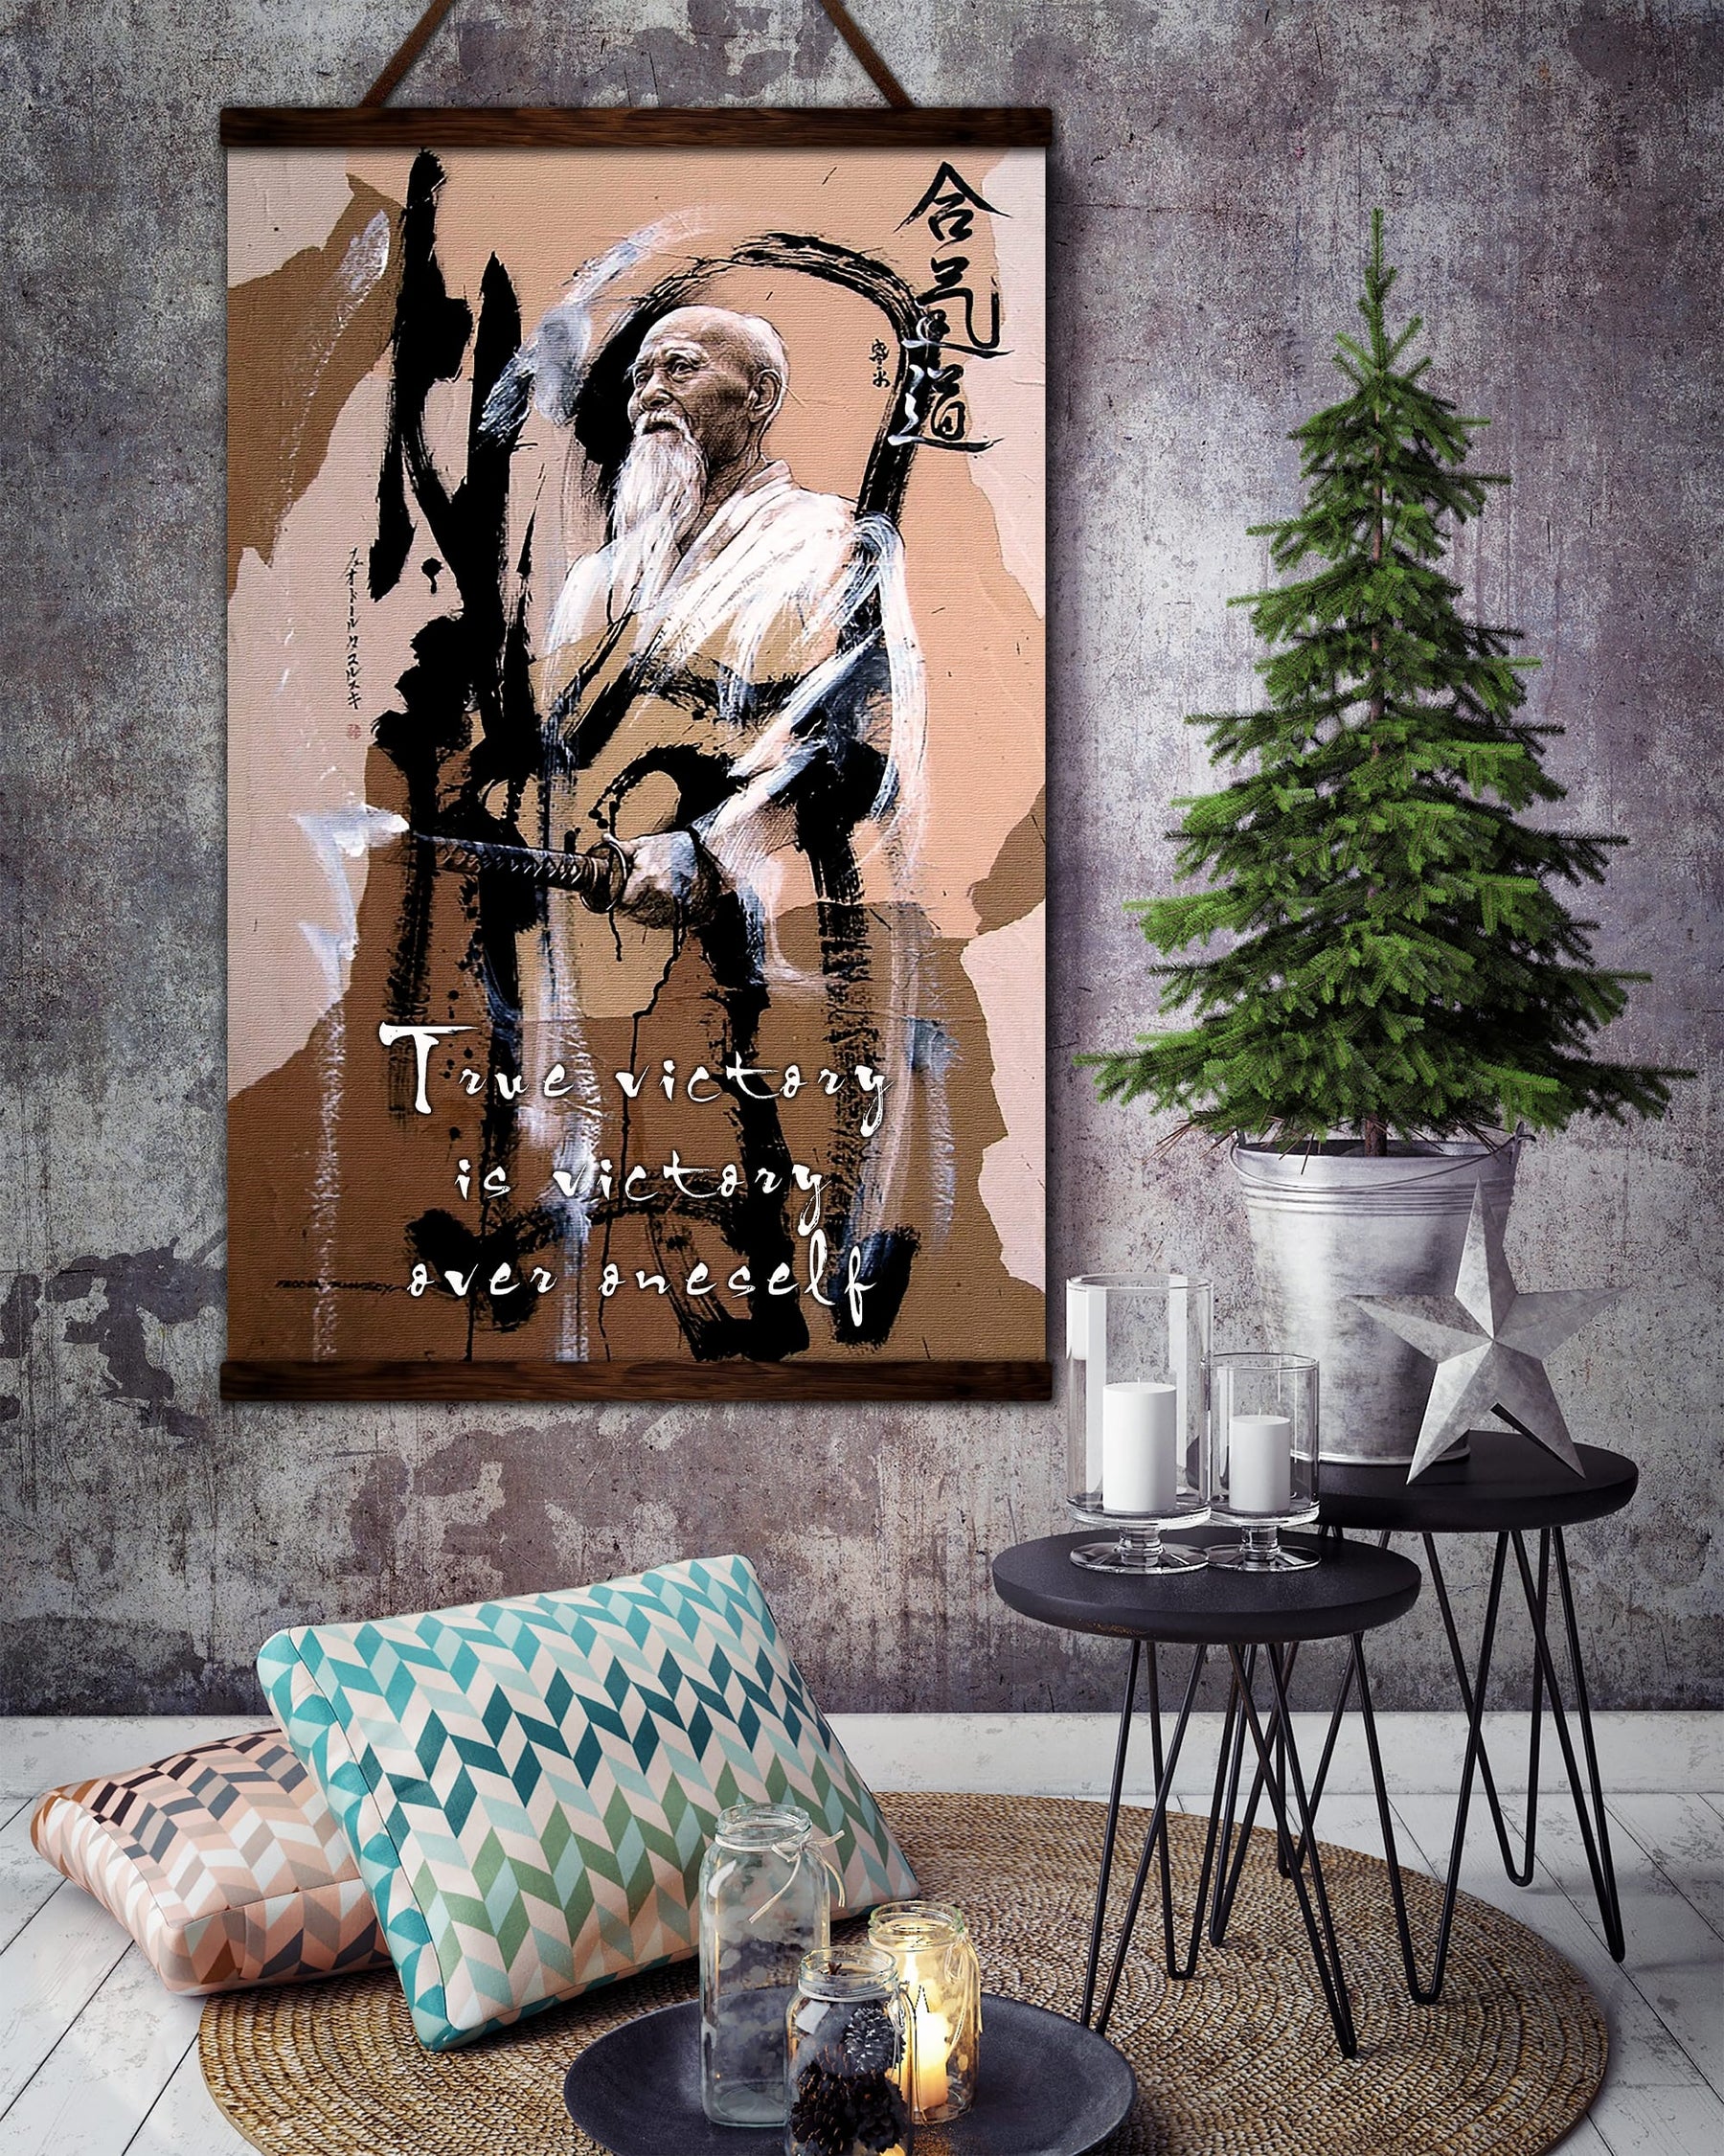 AI029 - True Victory Is Victory Over Oneself - Morihei Ueshiba - Vertical Poster - Vertical Canvas - Aikido Poster